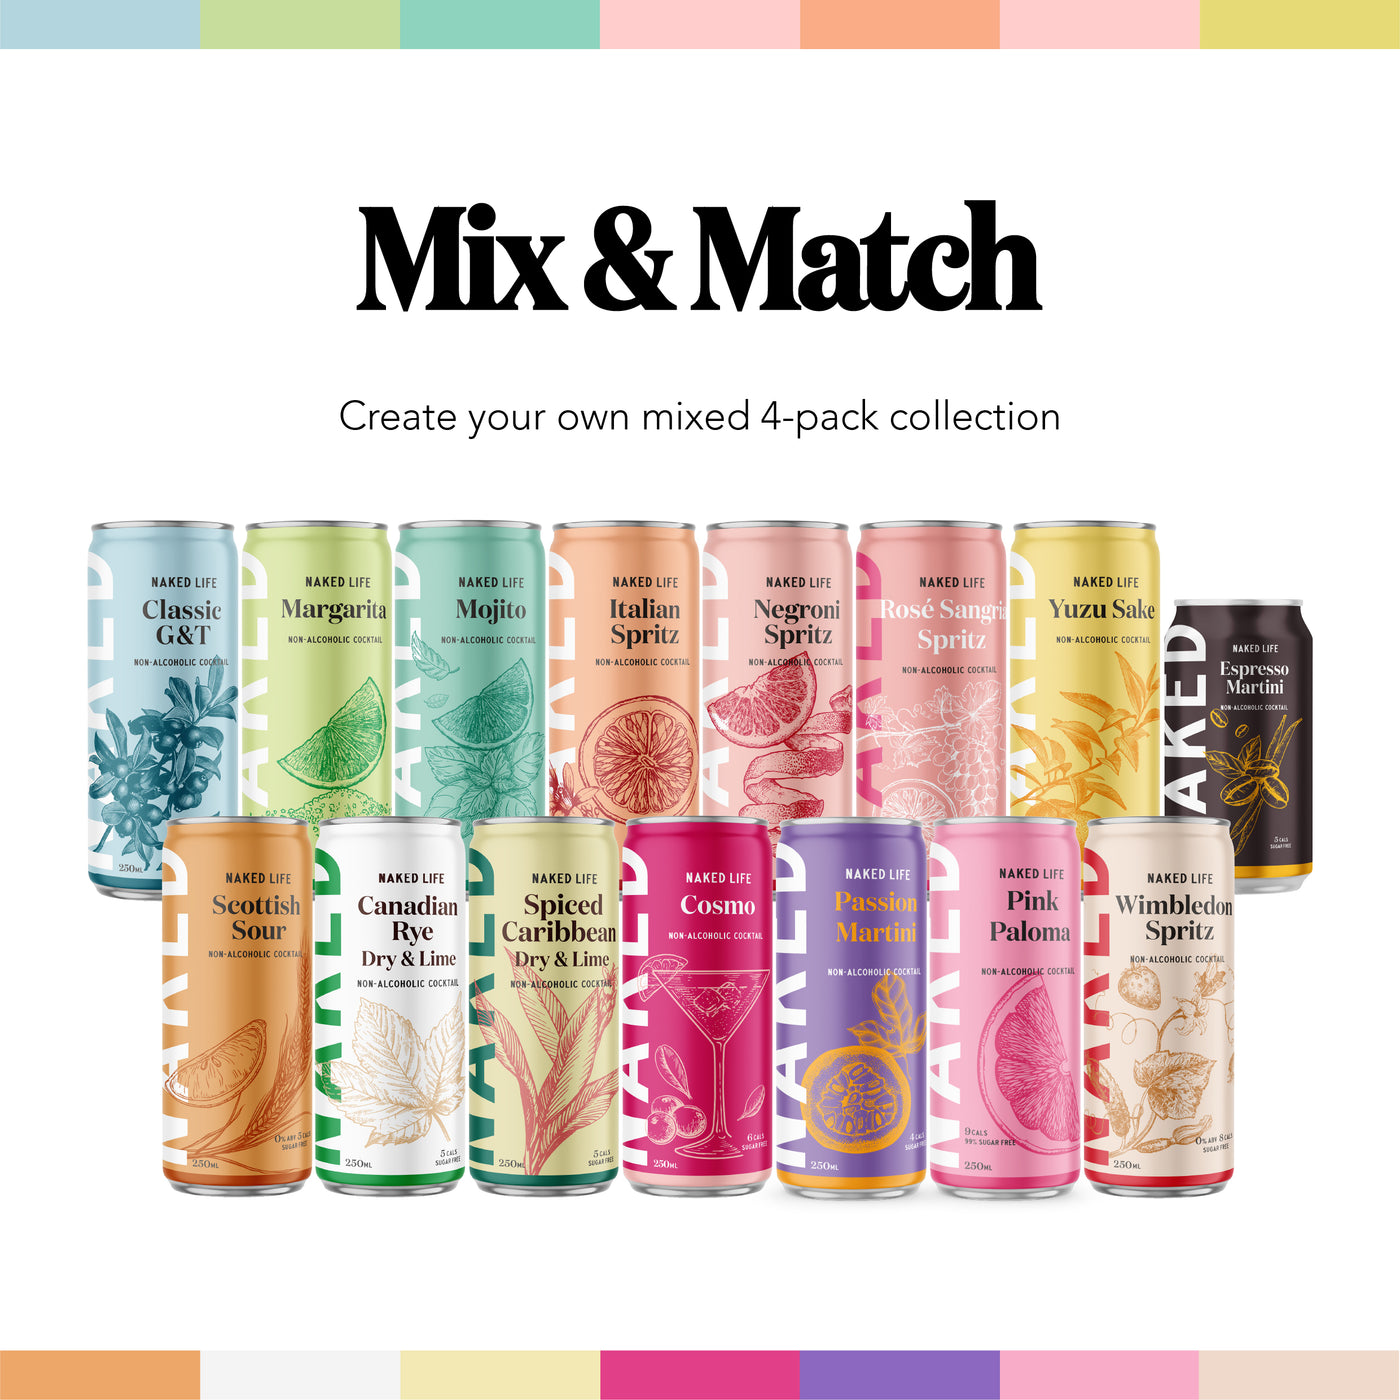 Naked Life Mixed Pack - Mix & Match Your Own - 4 x 4 x 250ml Cans